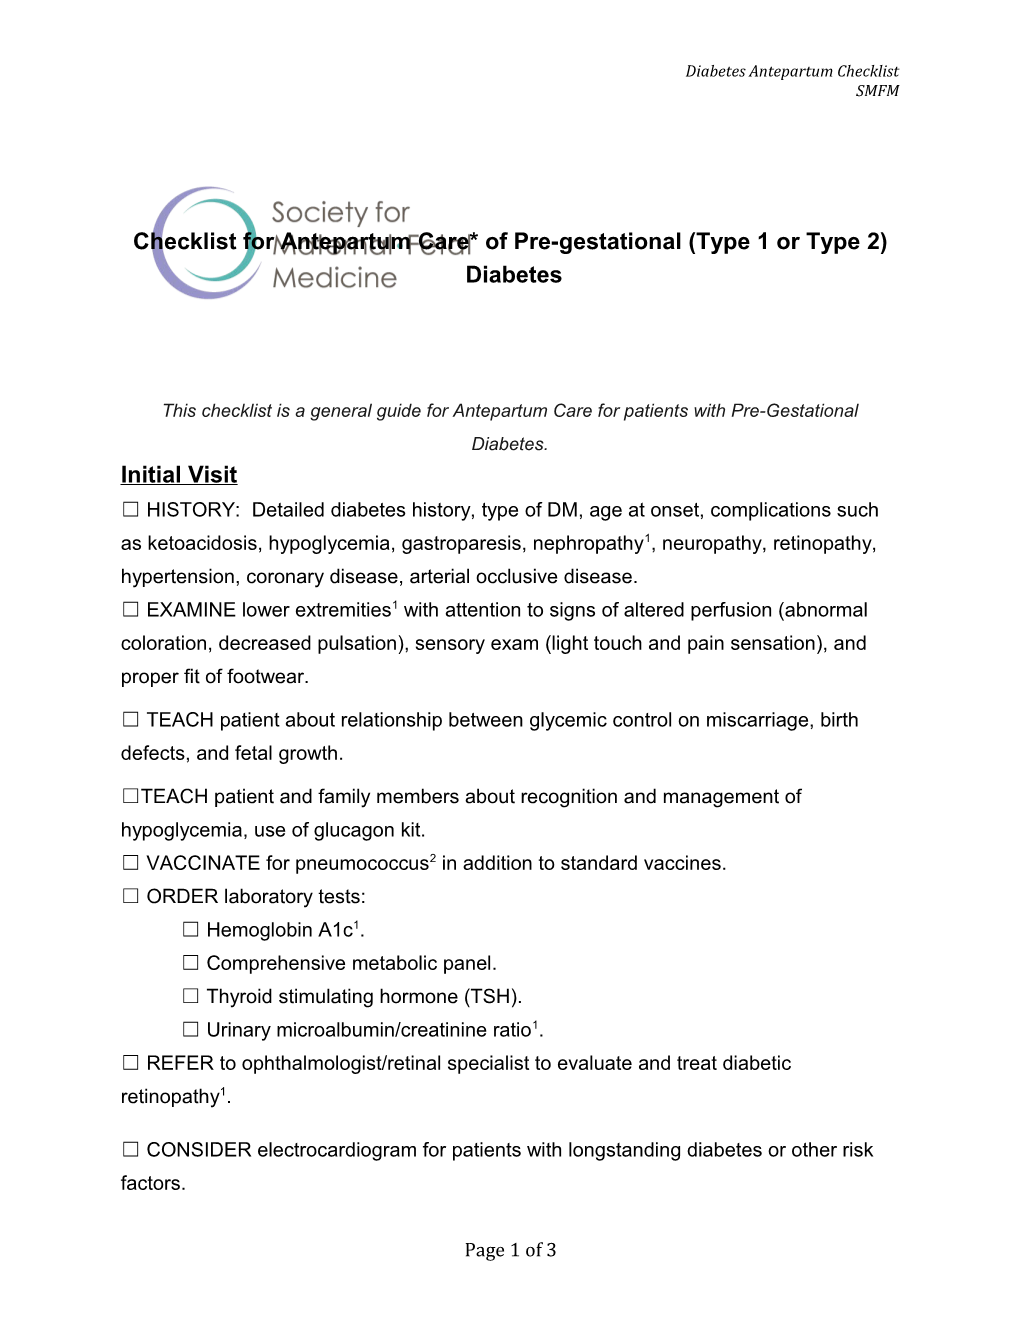 Checklist for Antepartum Care* of Pre-Gestational (Type 1 Or Type 2)